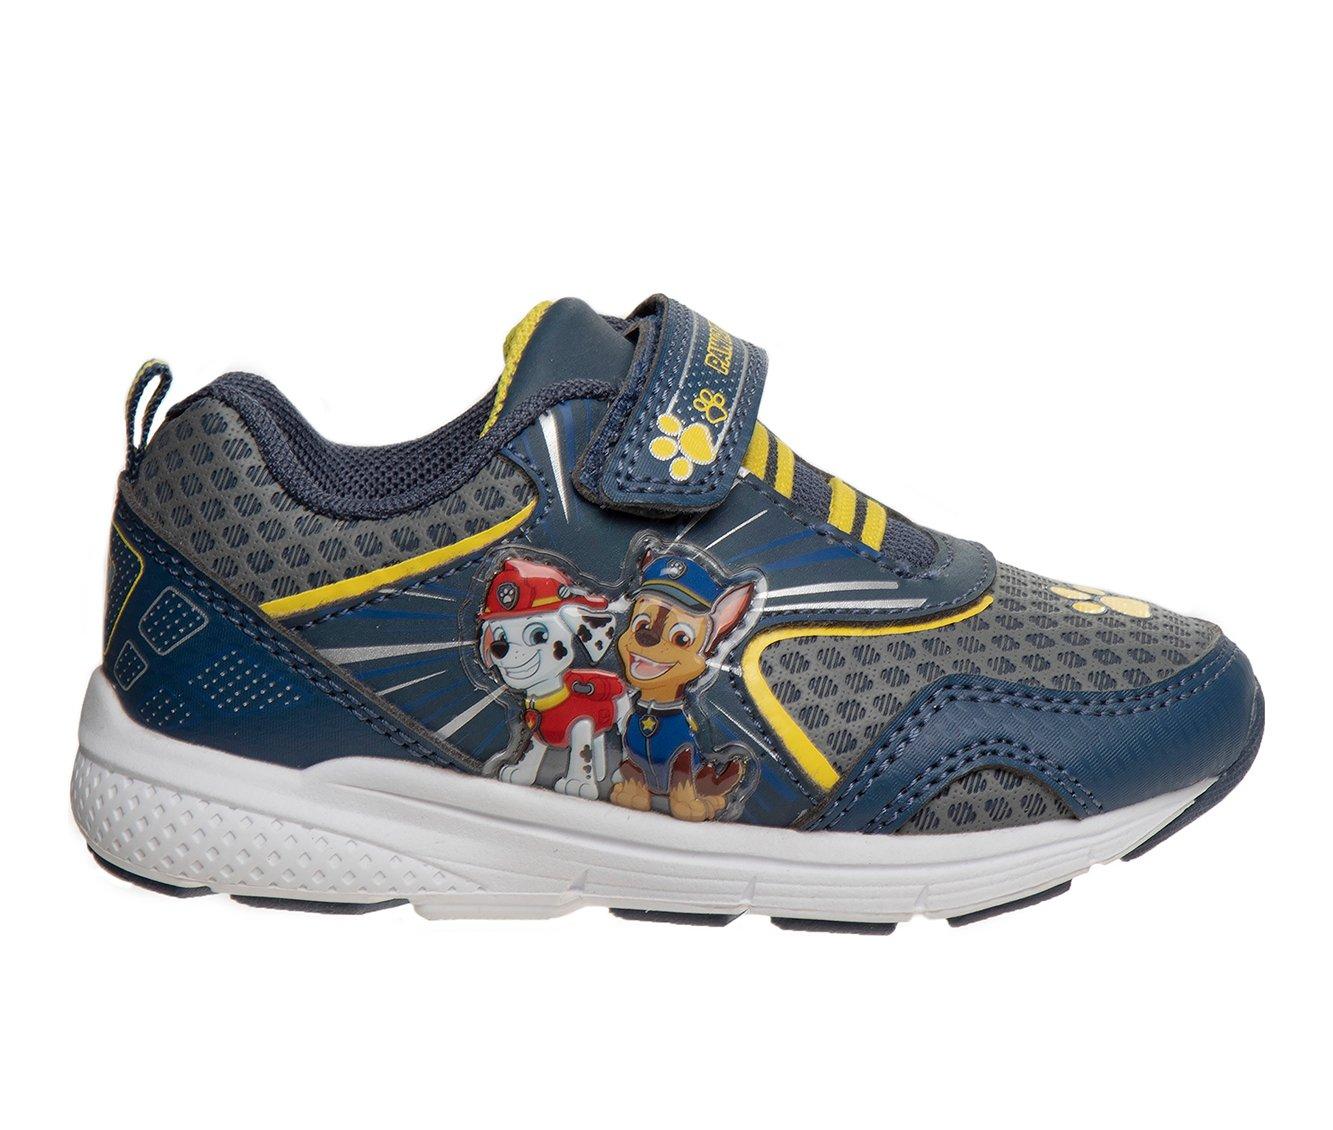 Boys' Nickelodeon Toddler & Little Kid CH18029C Paw Patrol Light-Up Sneakers